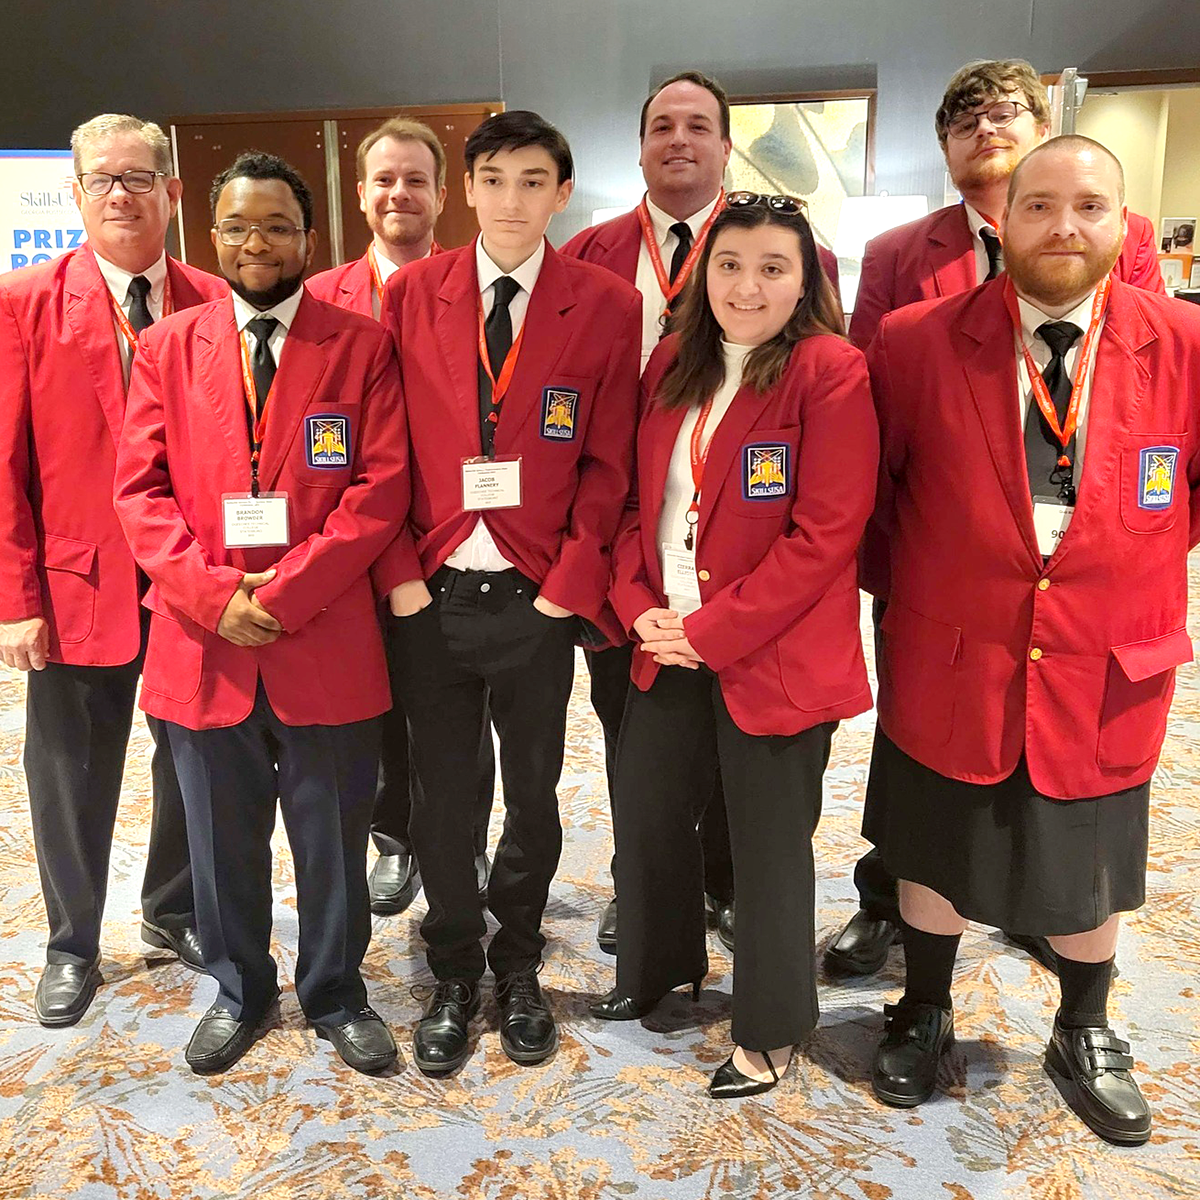 OTC Students posing together for a group photo at the SkillsUSA competition in Atlanta Georgia